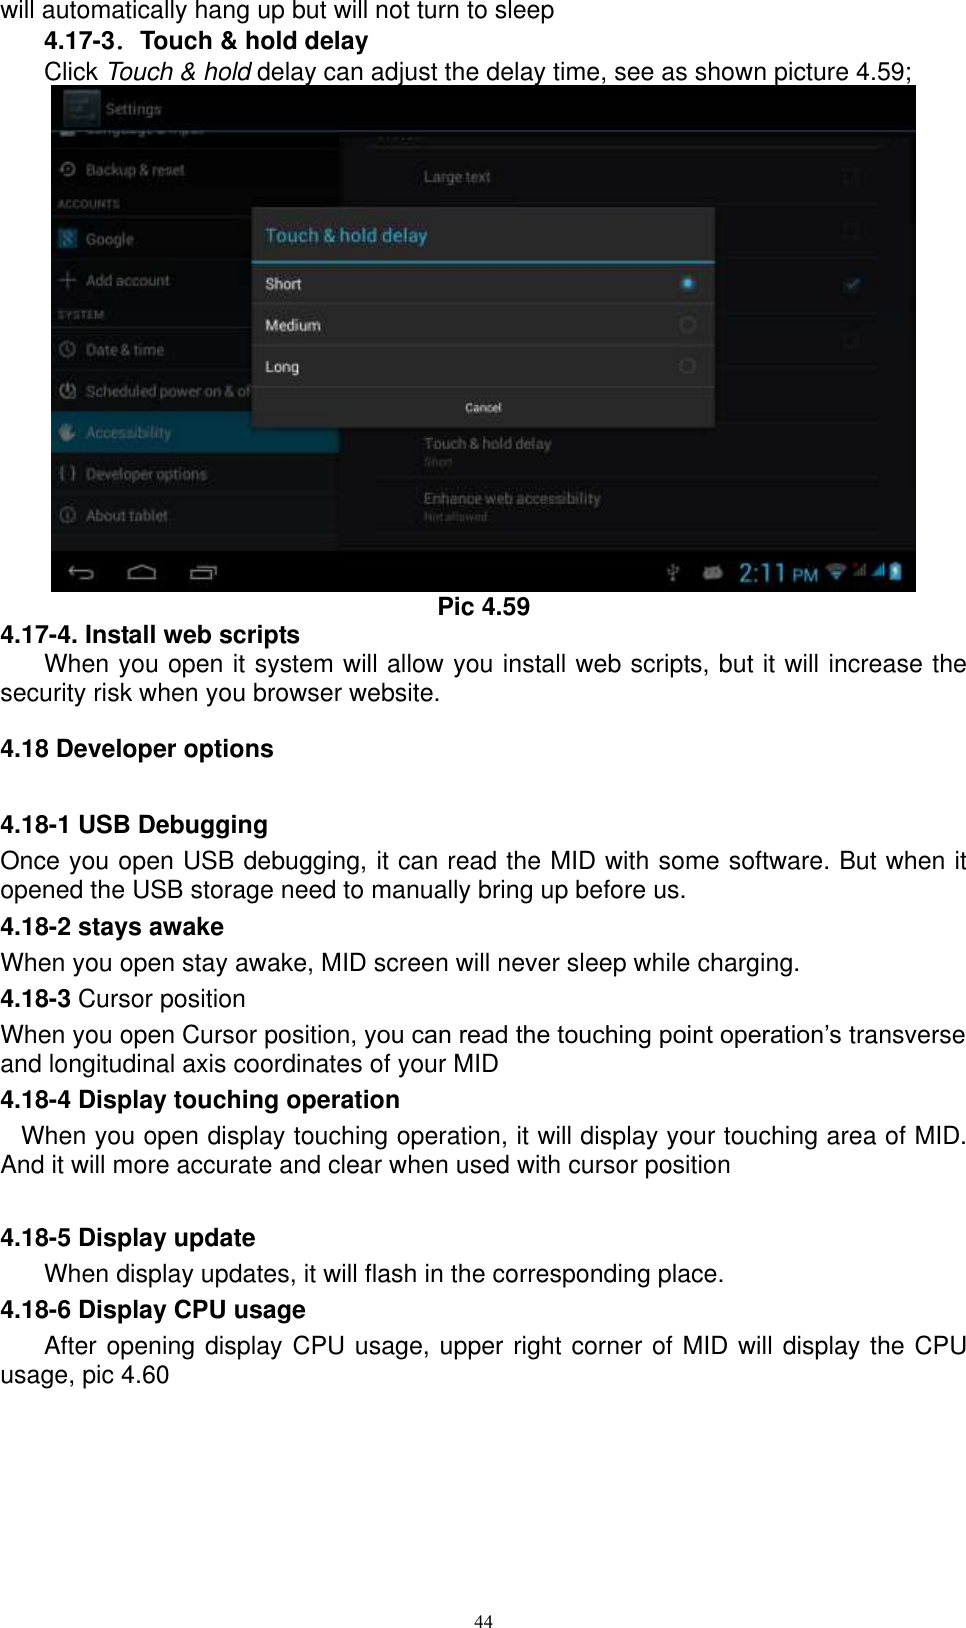      44 will automatically hang up but will not turn to sleep 4.17-3．Touch &amp; hold delay Click Touch &amp; hold delay can adjust the delay time, see as shown picture 4.59;  Pic 4.59 4.17-4. Install web scripts When you open it system will allow you install web scripts, but it will increase the security risk when you browser website.   4.18 Developer options 4.18-1 USB Debugging   Once you open USB debugging, it can read the MID with some software. But when it opened the USB storage need to manually bring up before us. 4.18-2 stays awake When you open stay awake, MID screen will never sleep while charging. 4.18-3 Cursor position When you open Cursor position, you can read the touching point operation’s transverse and longitudinal axis coordinates of your MID 4.18-4 Display touching operation When you open display touching operation, it will display your touching area of MID. And it will more accurate and clear when used with cursor position  4.18-5 Display update When display updates, it will flash in the corresponding place. 4.18-6 Display CPU usage After opening display CPU usage, upper right corner of MID will display the CPU usage, pic 4.60 